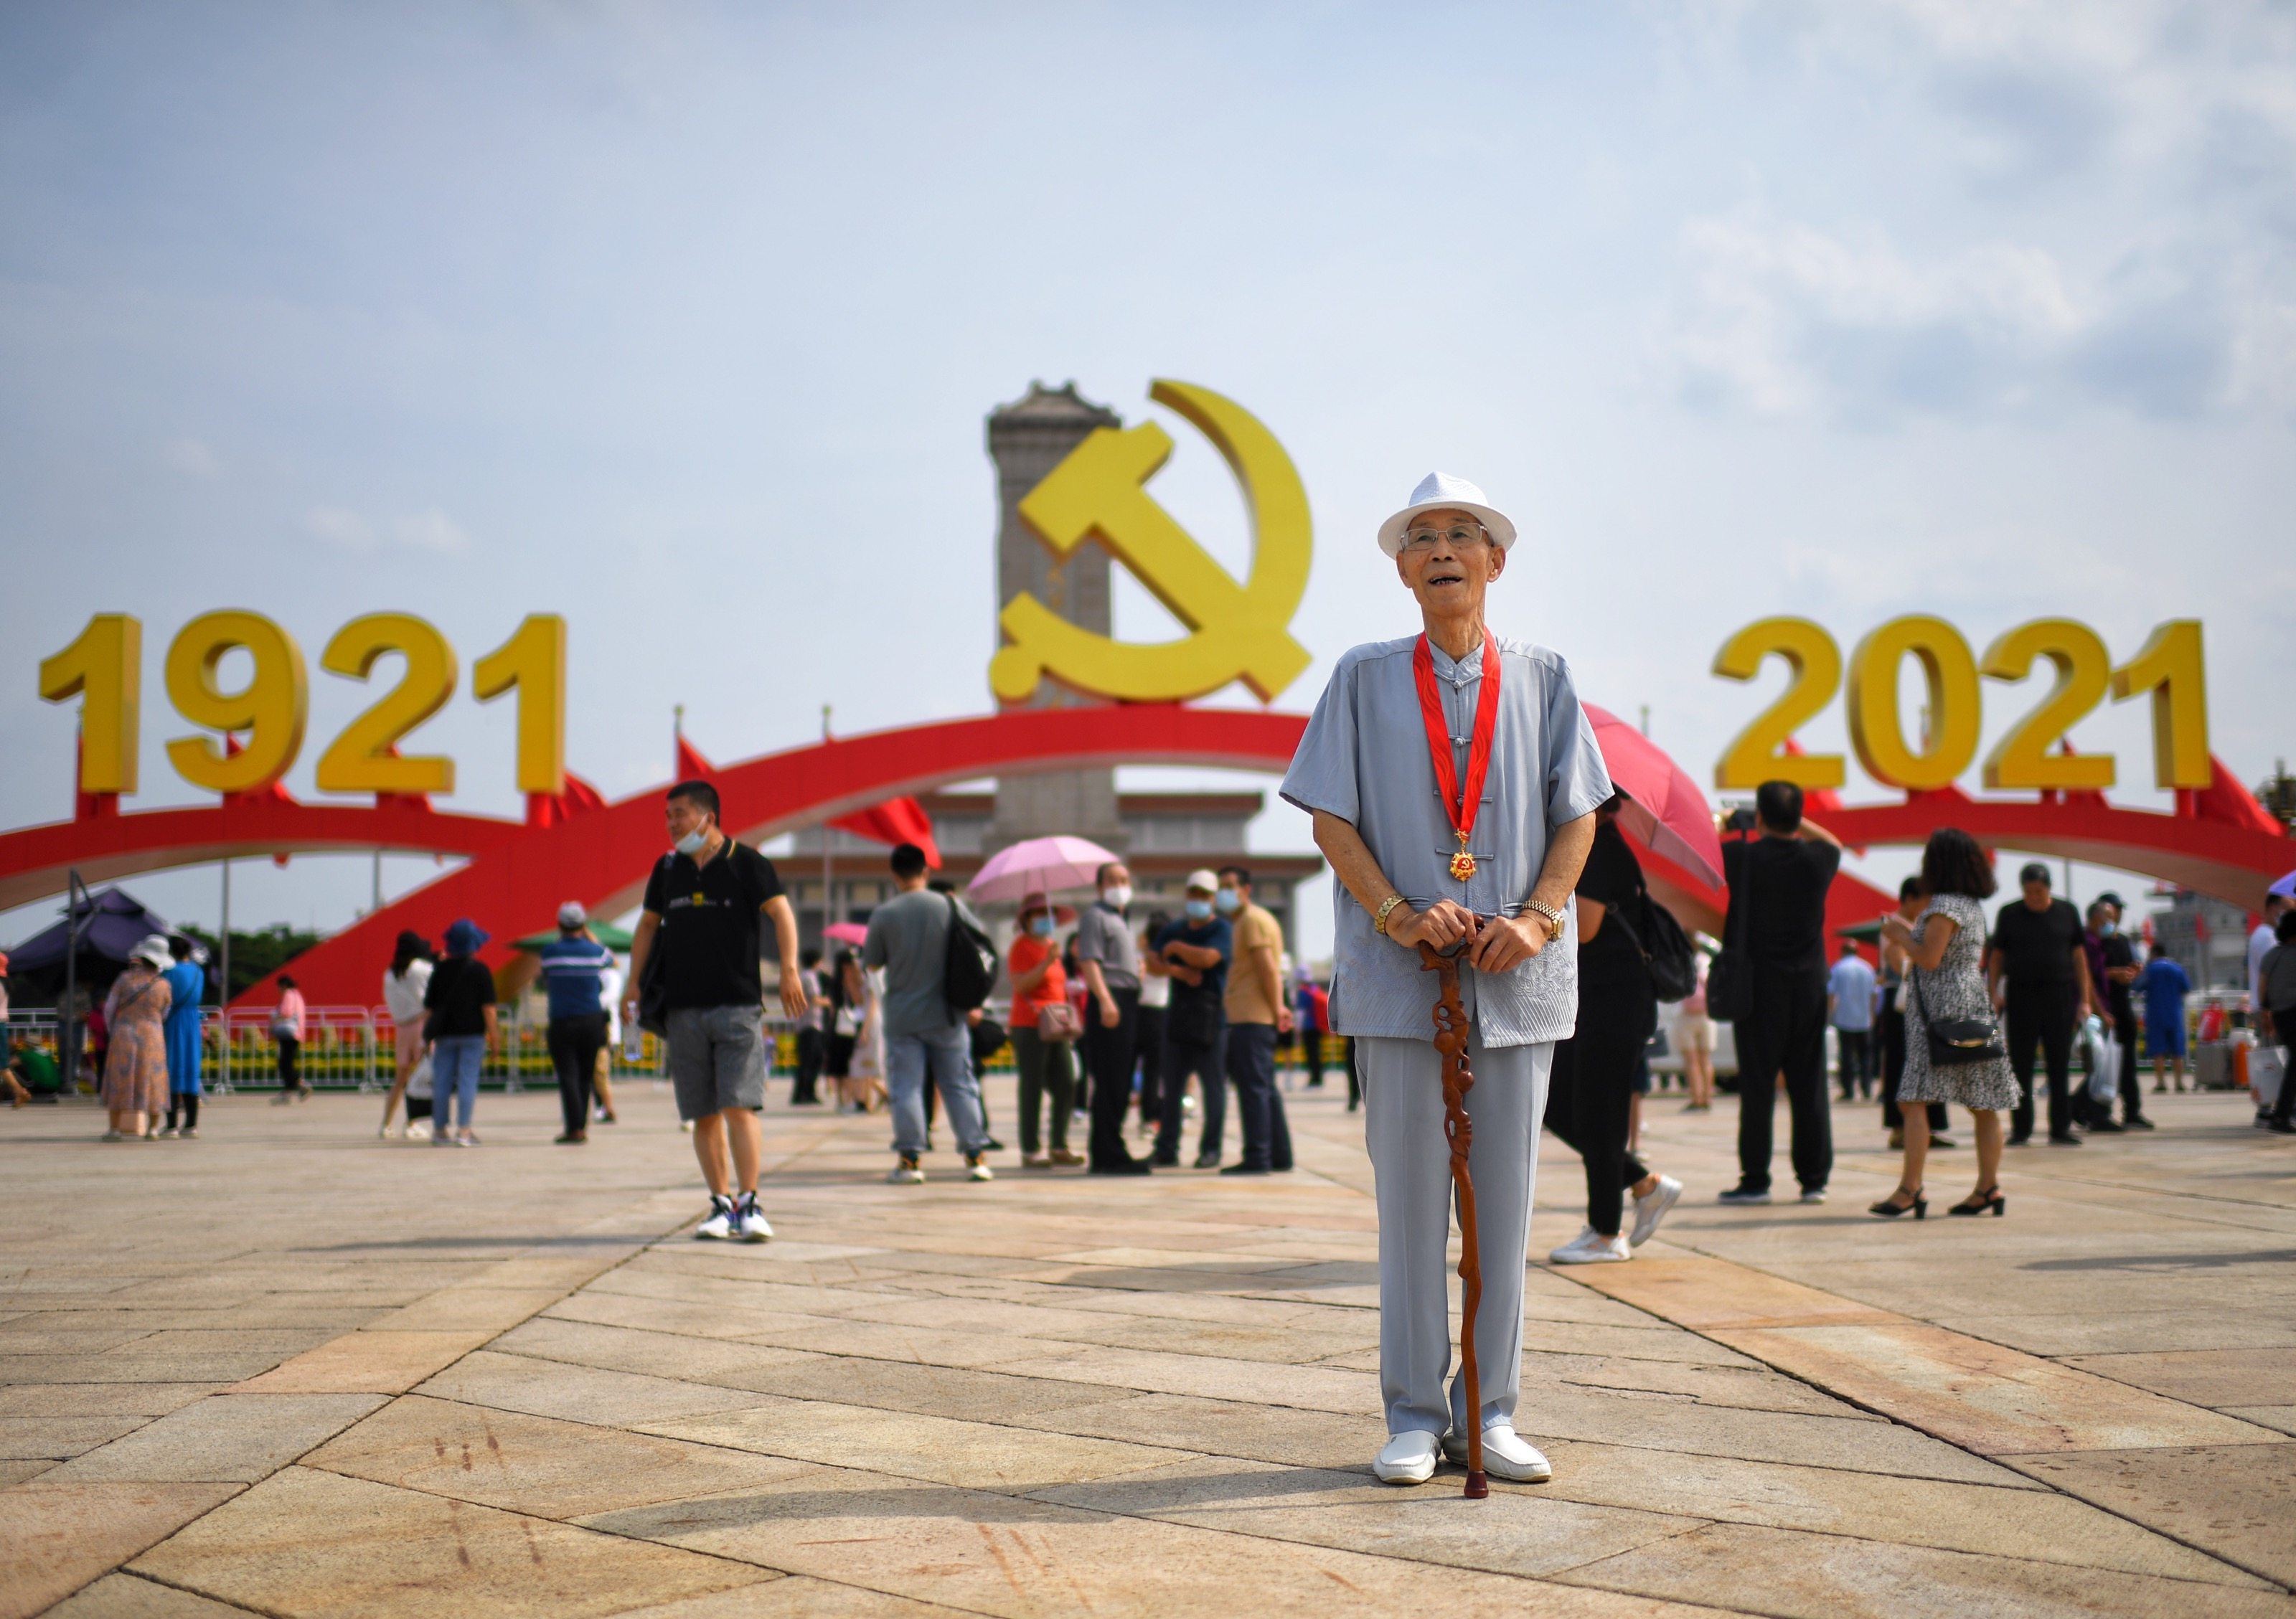 China celebrated the 100th anniversary of the founding of the communist party in 2021, and what a year it was. Photo: Getty Images